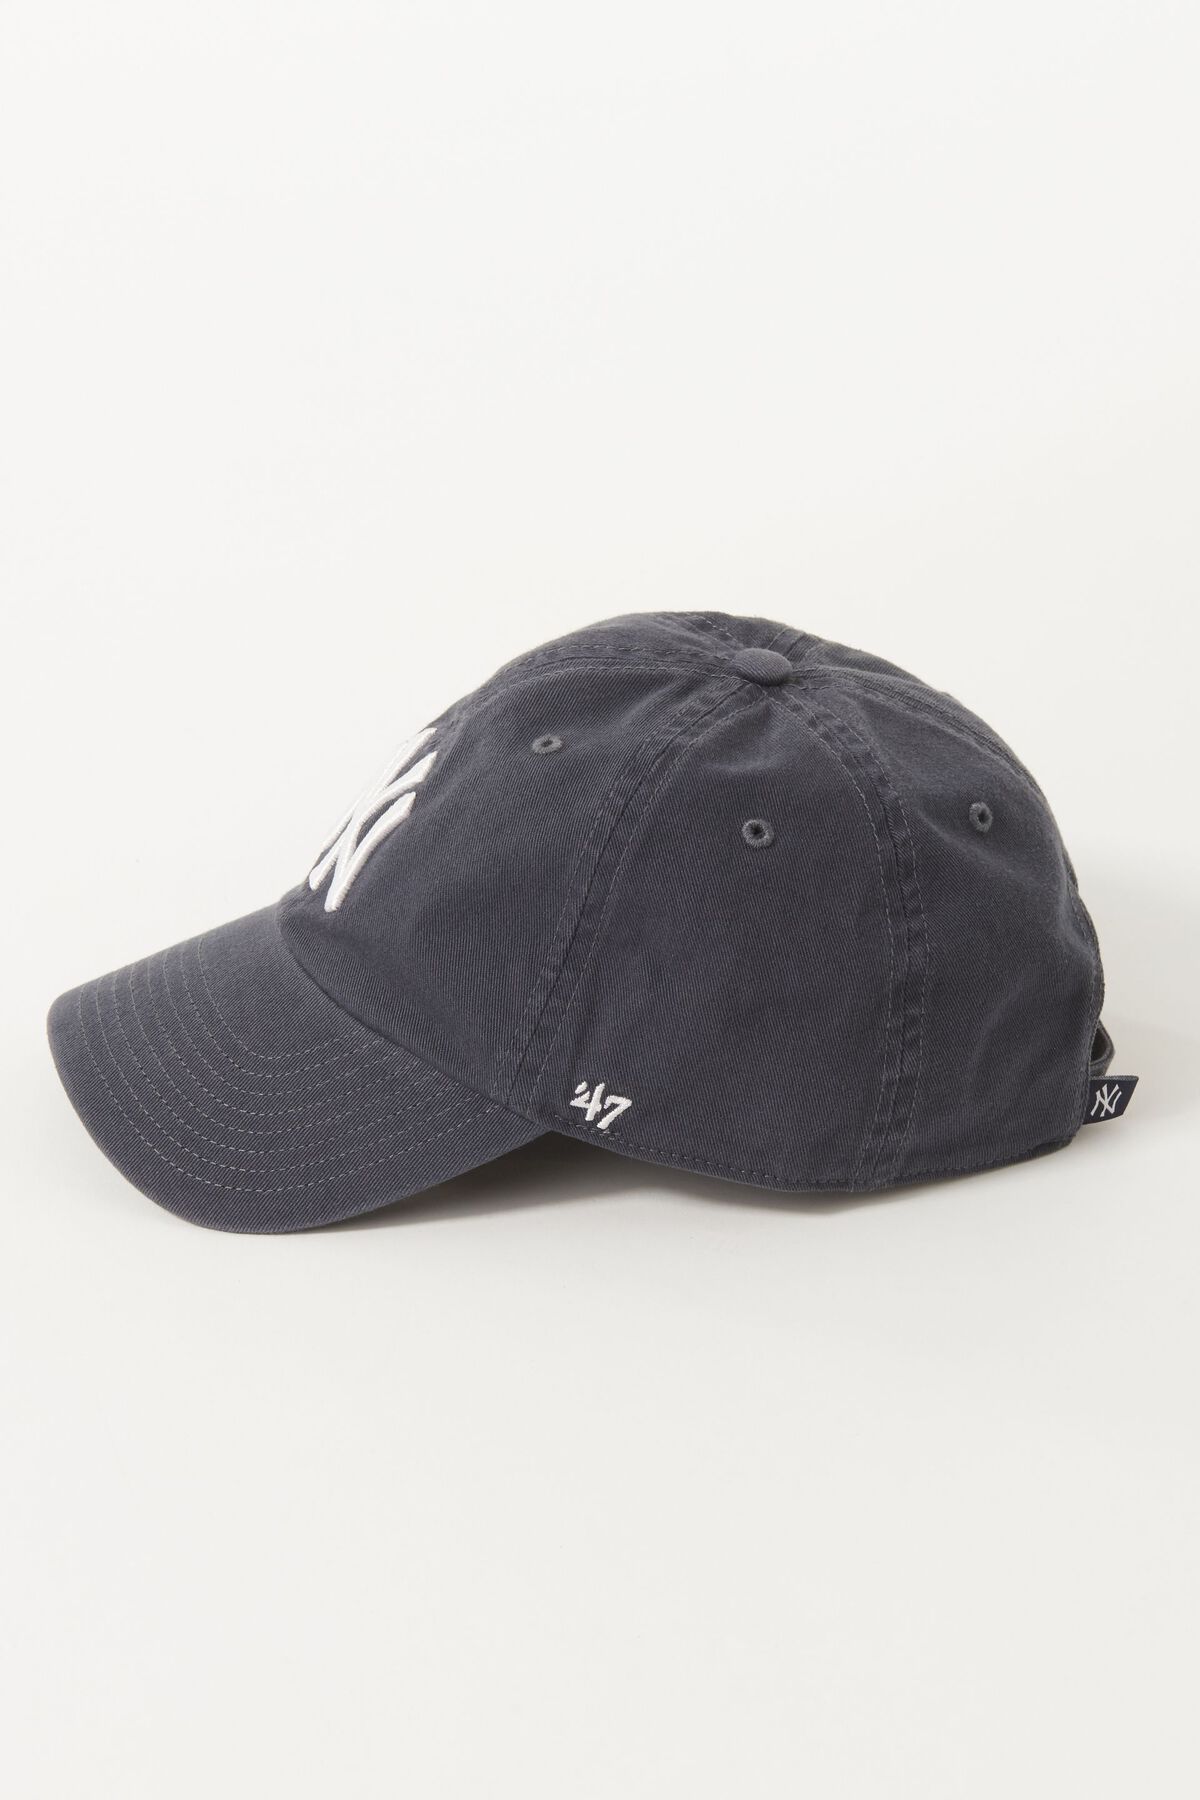 Garage Casquette Clean Up - 47 BRAND - NY. 3